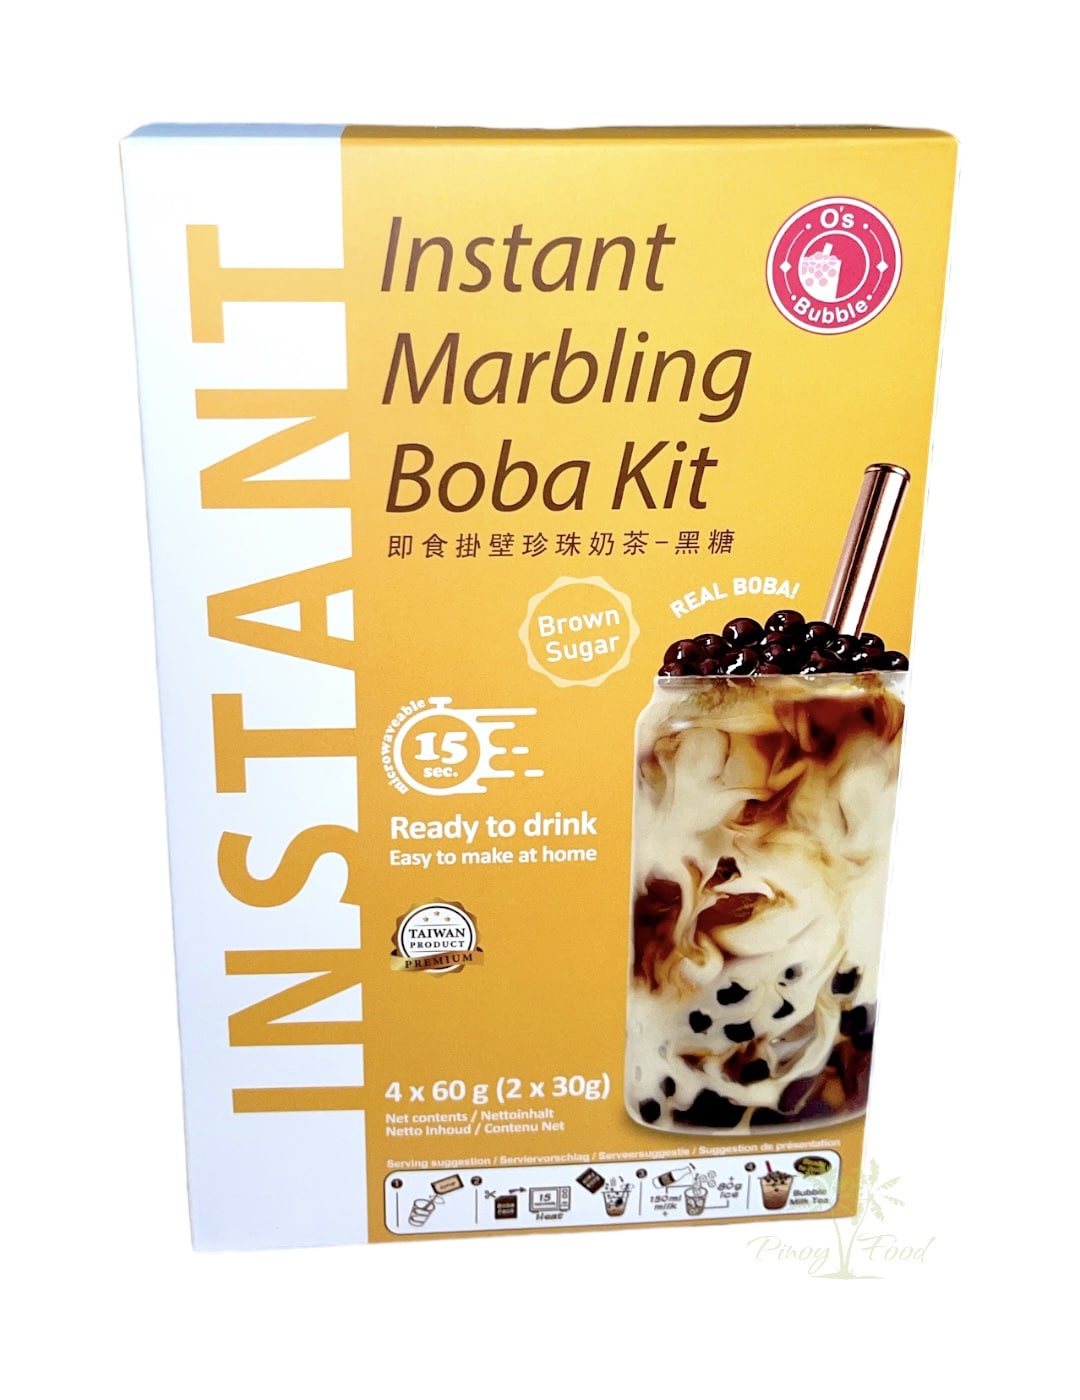 O's Bubble Instant Marbling Boba Party Kit (Ambient) – 6 Servings